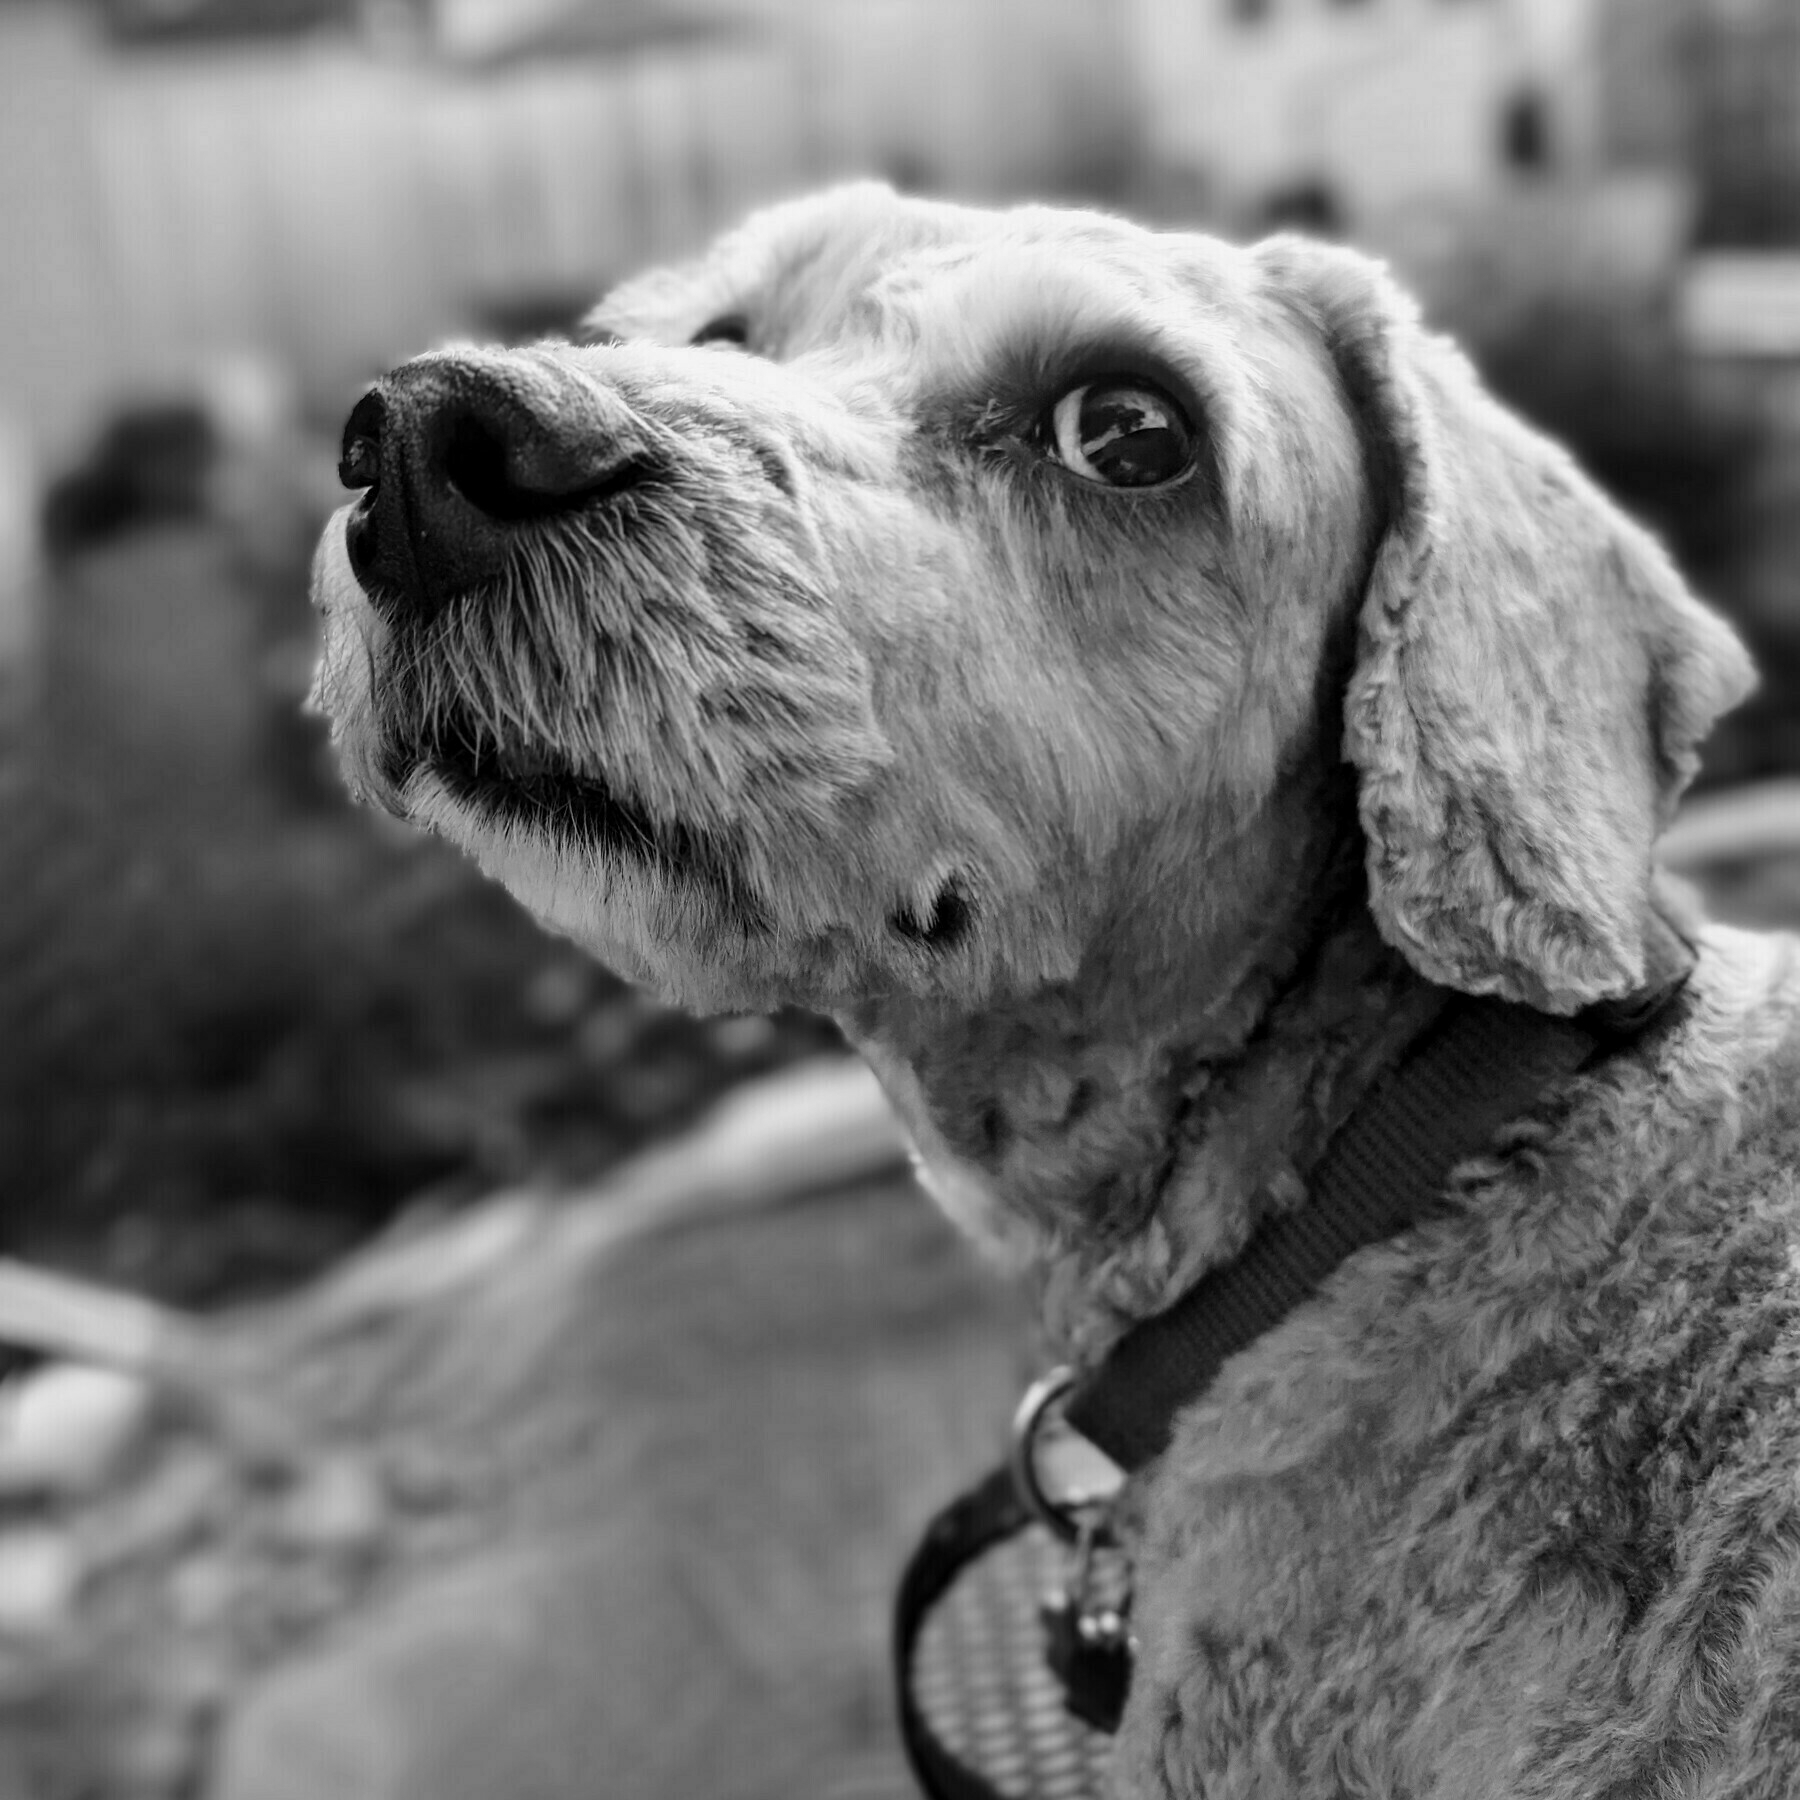 Black & white photo of a dog looking up at something outside of the image frame.